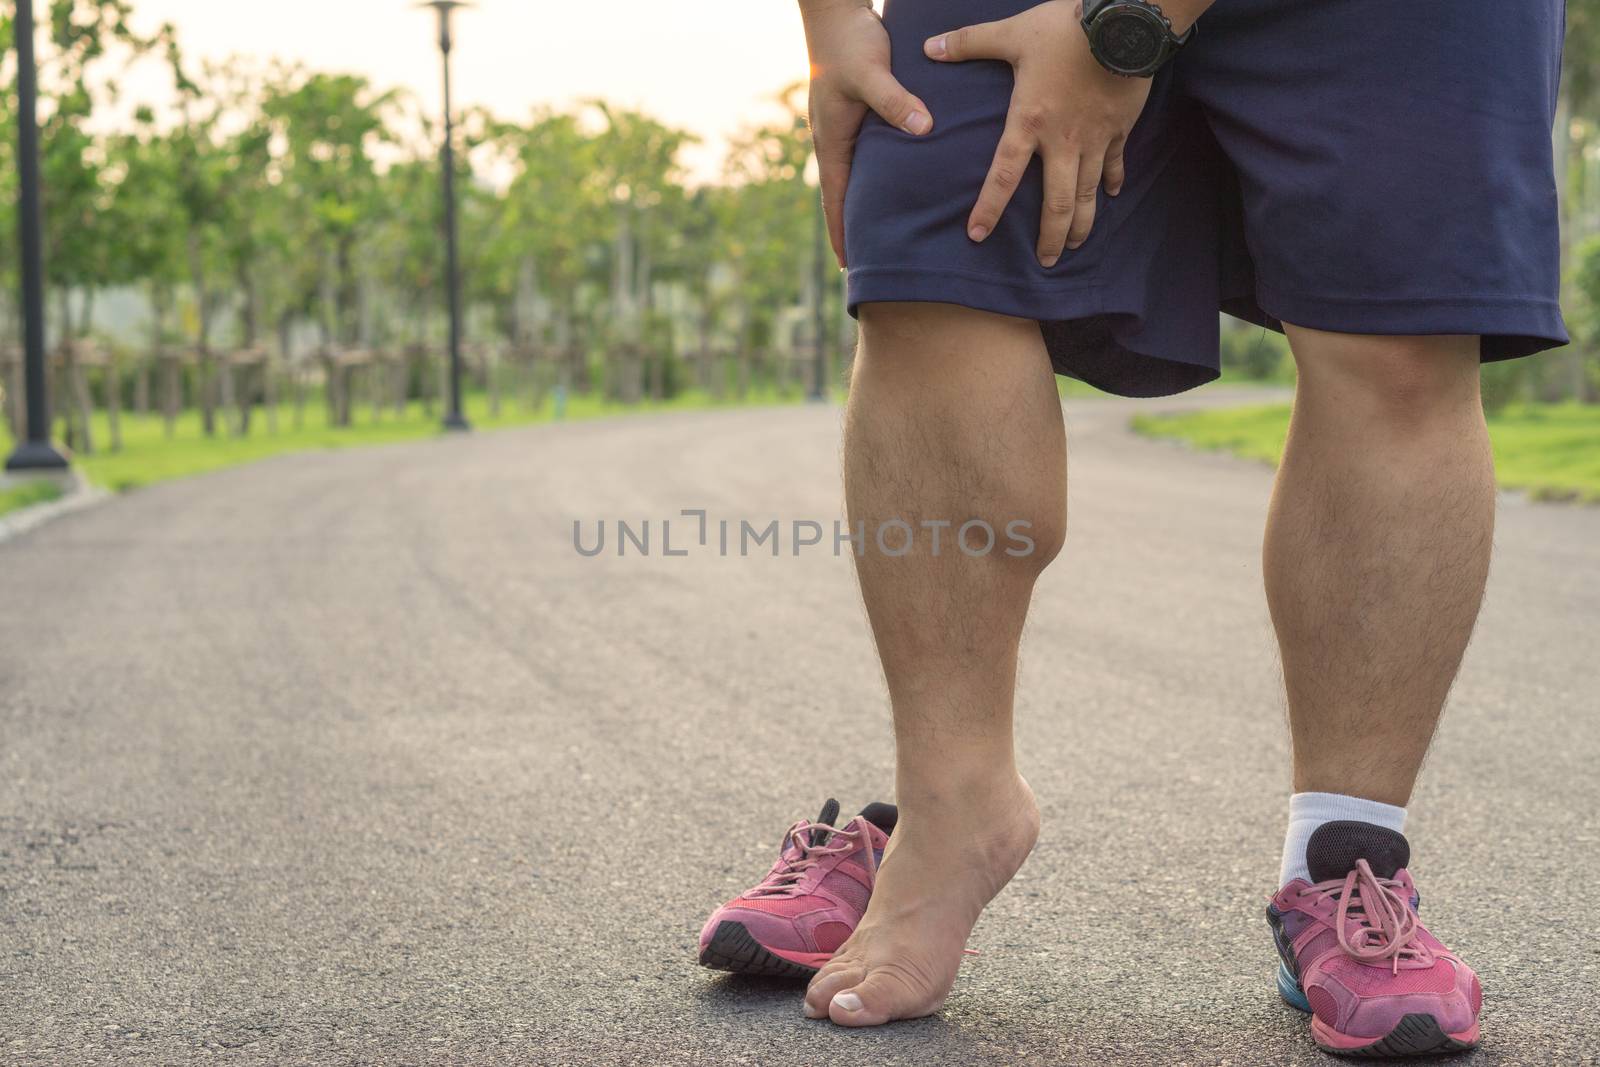 Knee Injuries. Fat man holding knee with his hands in pain after suffering muscle injury during a running workout at park. Healthcare and sport concept.